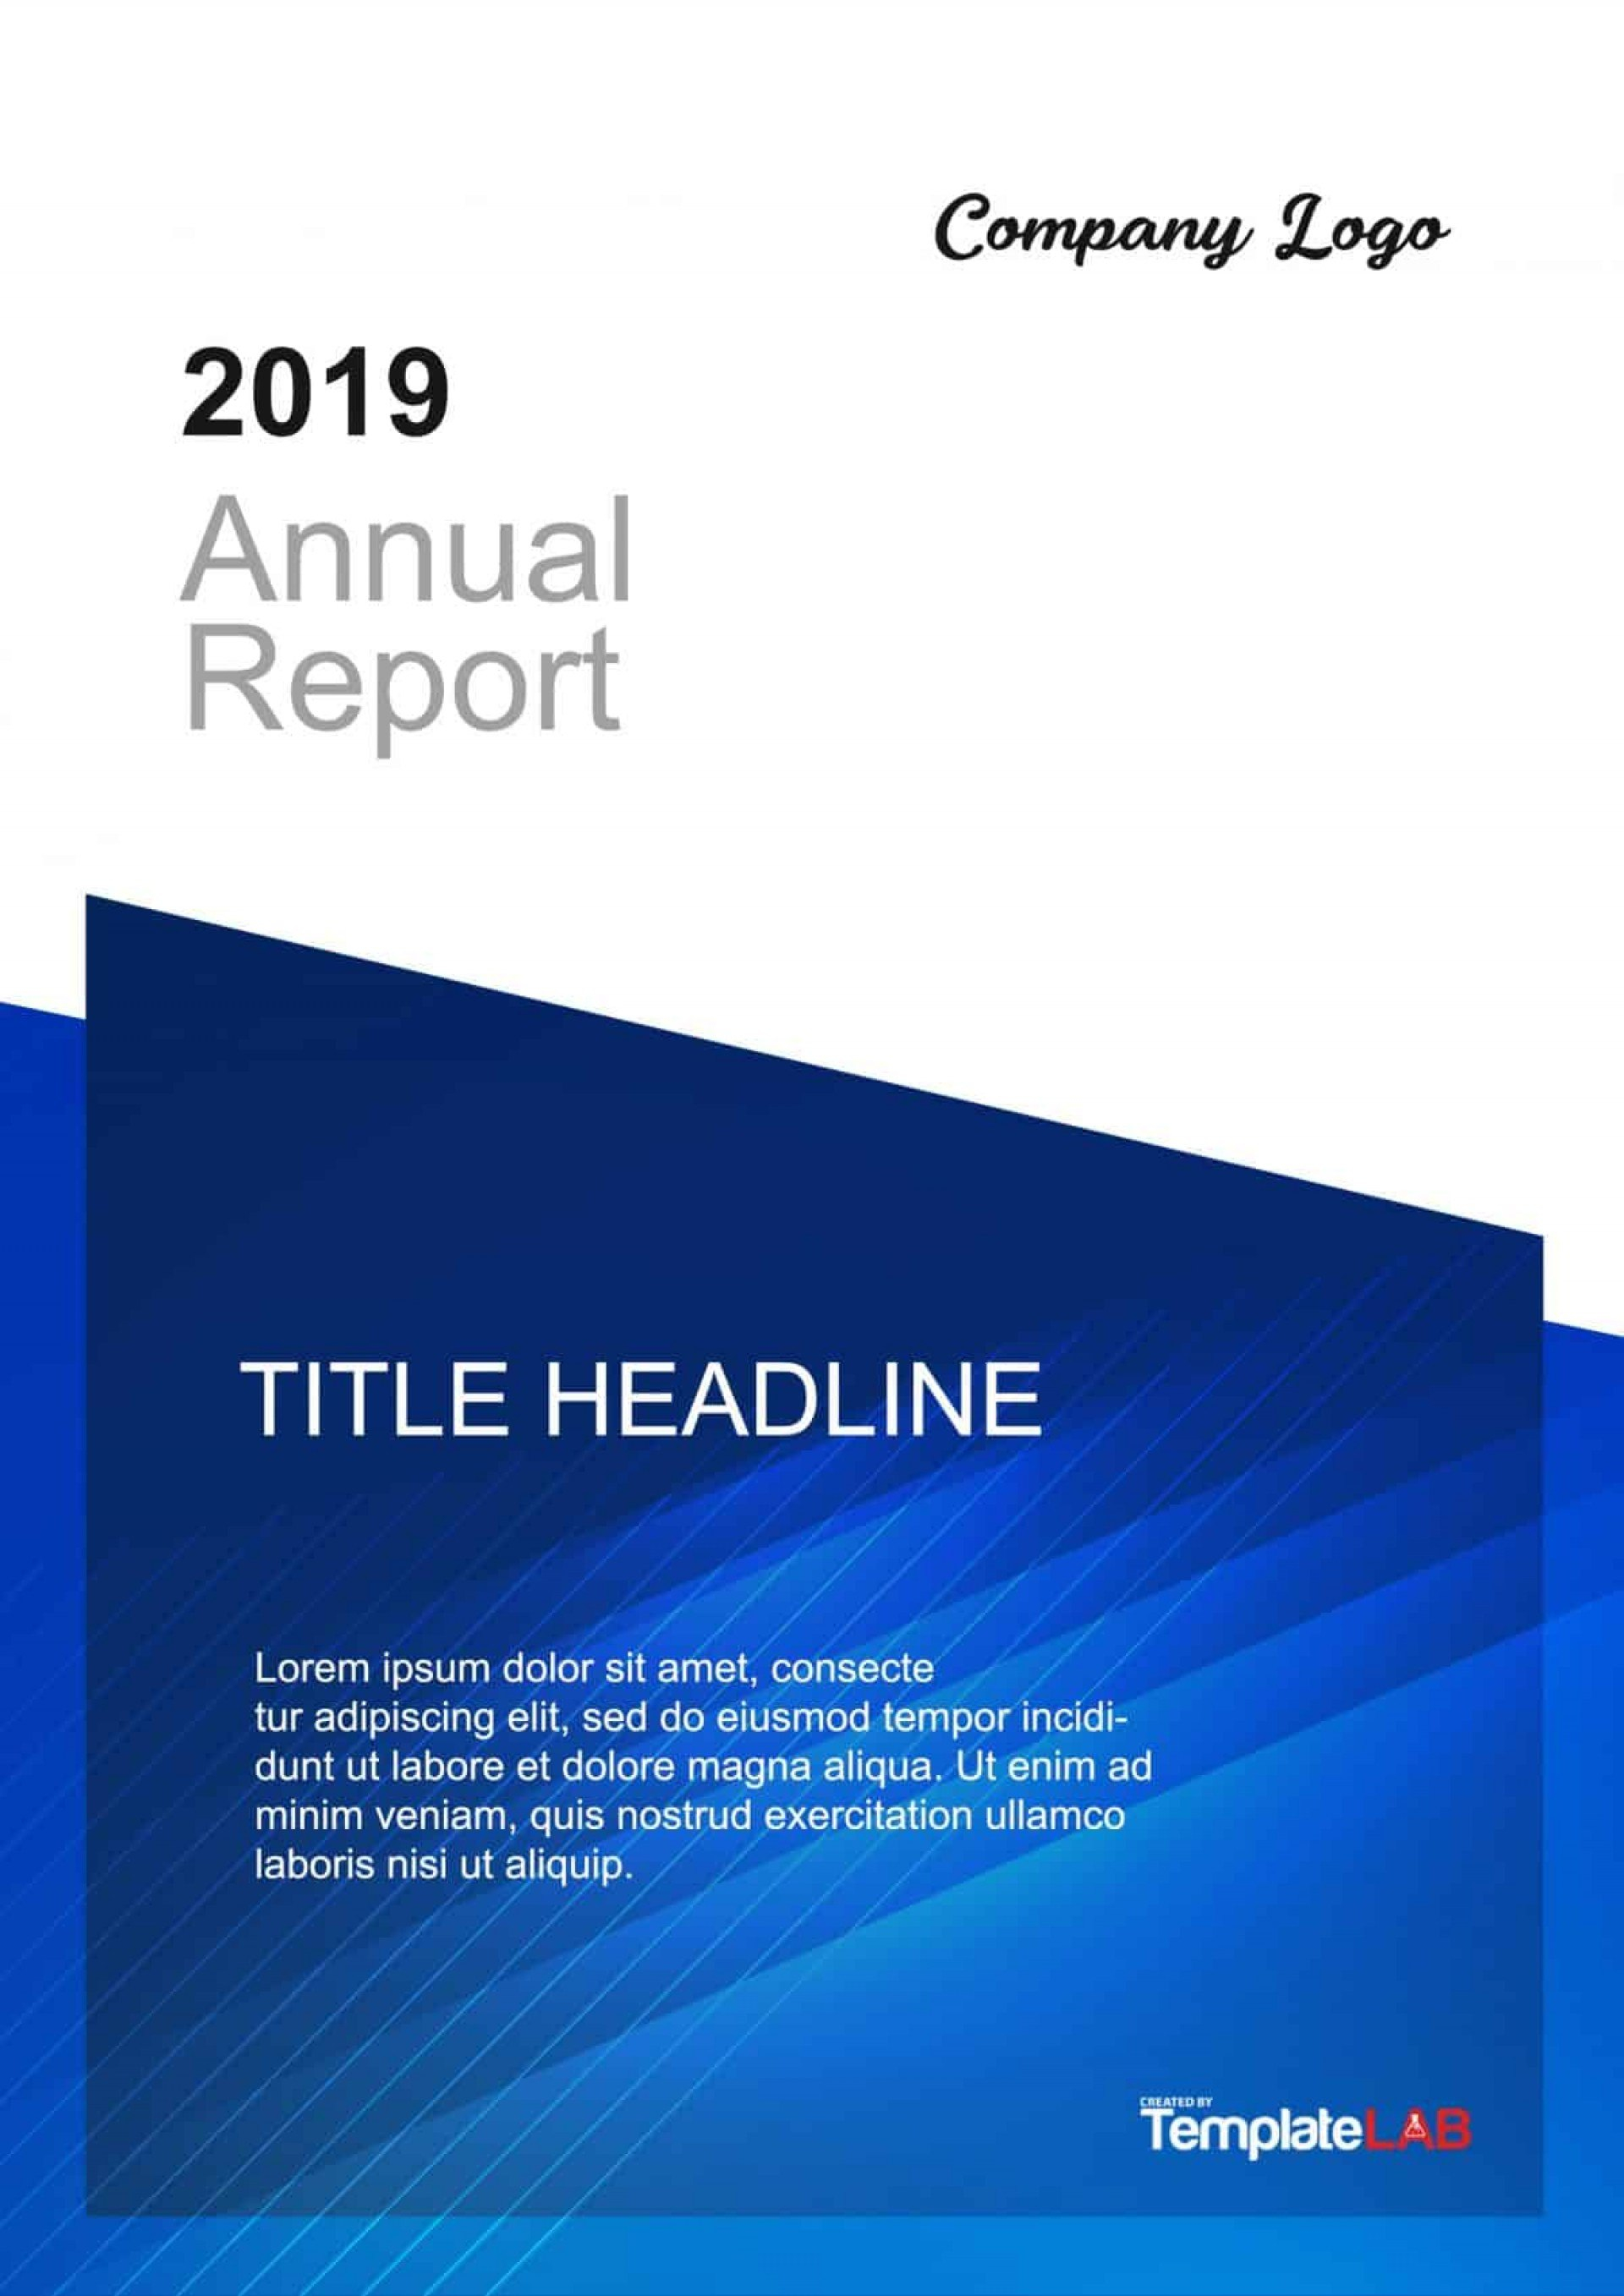 Template Ideas Report Cover Page Templatelab Marvelous Free with regard to Cover Page For Annual Report Template